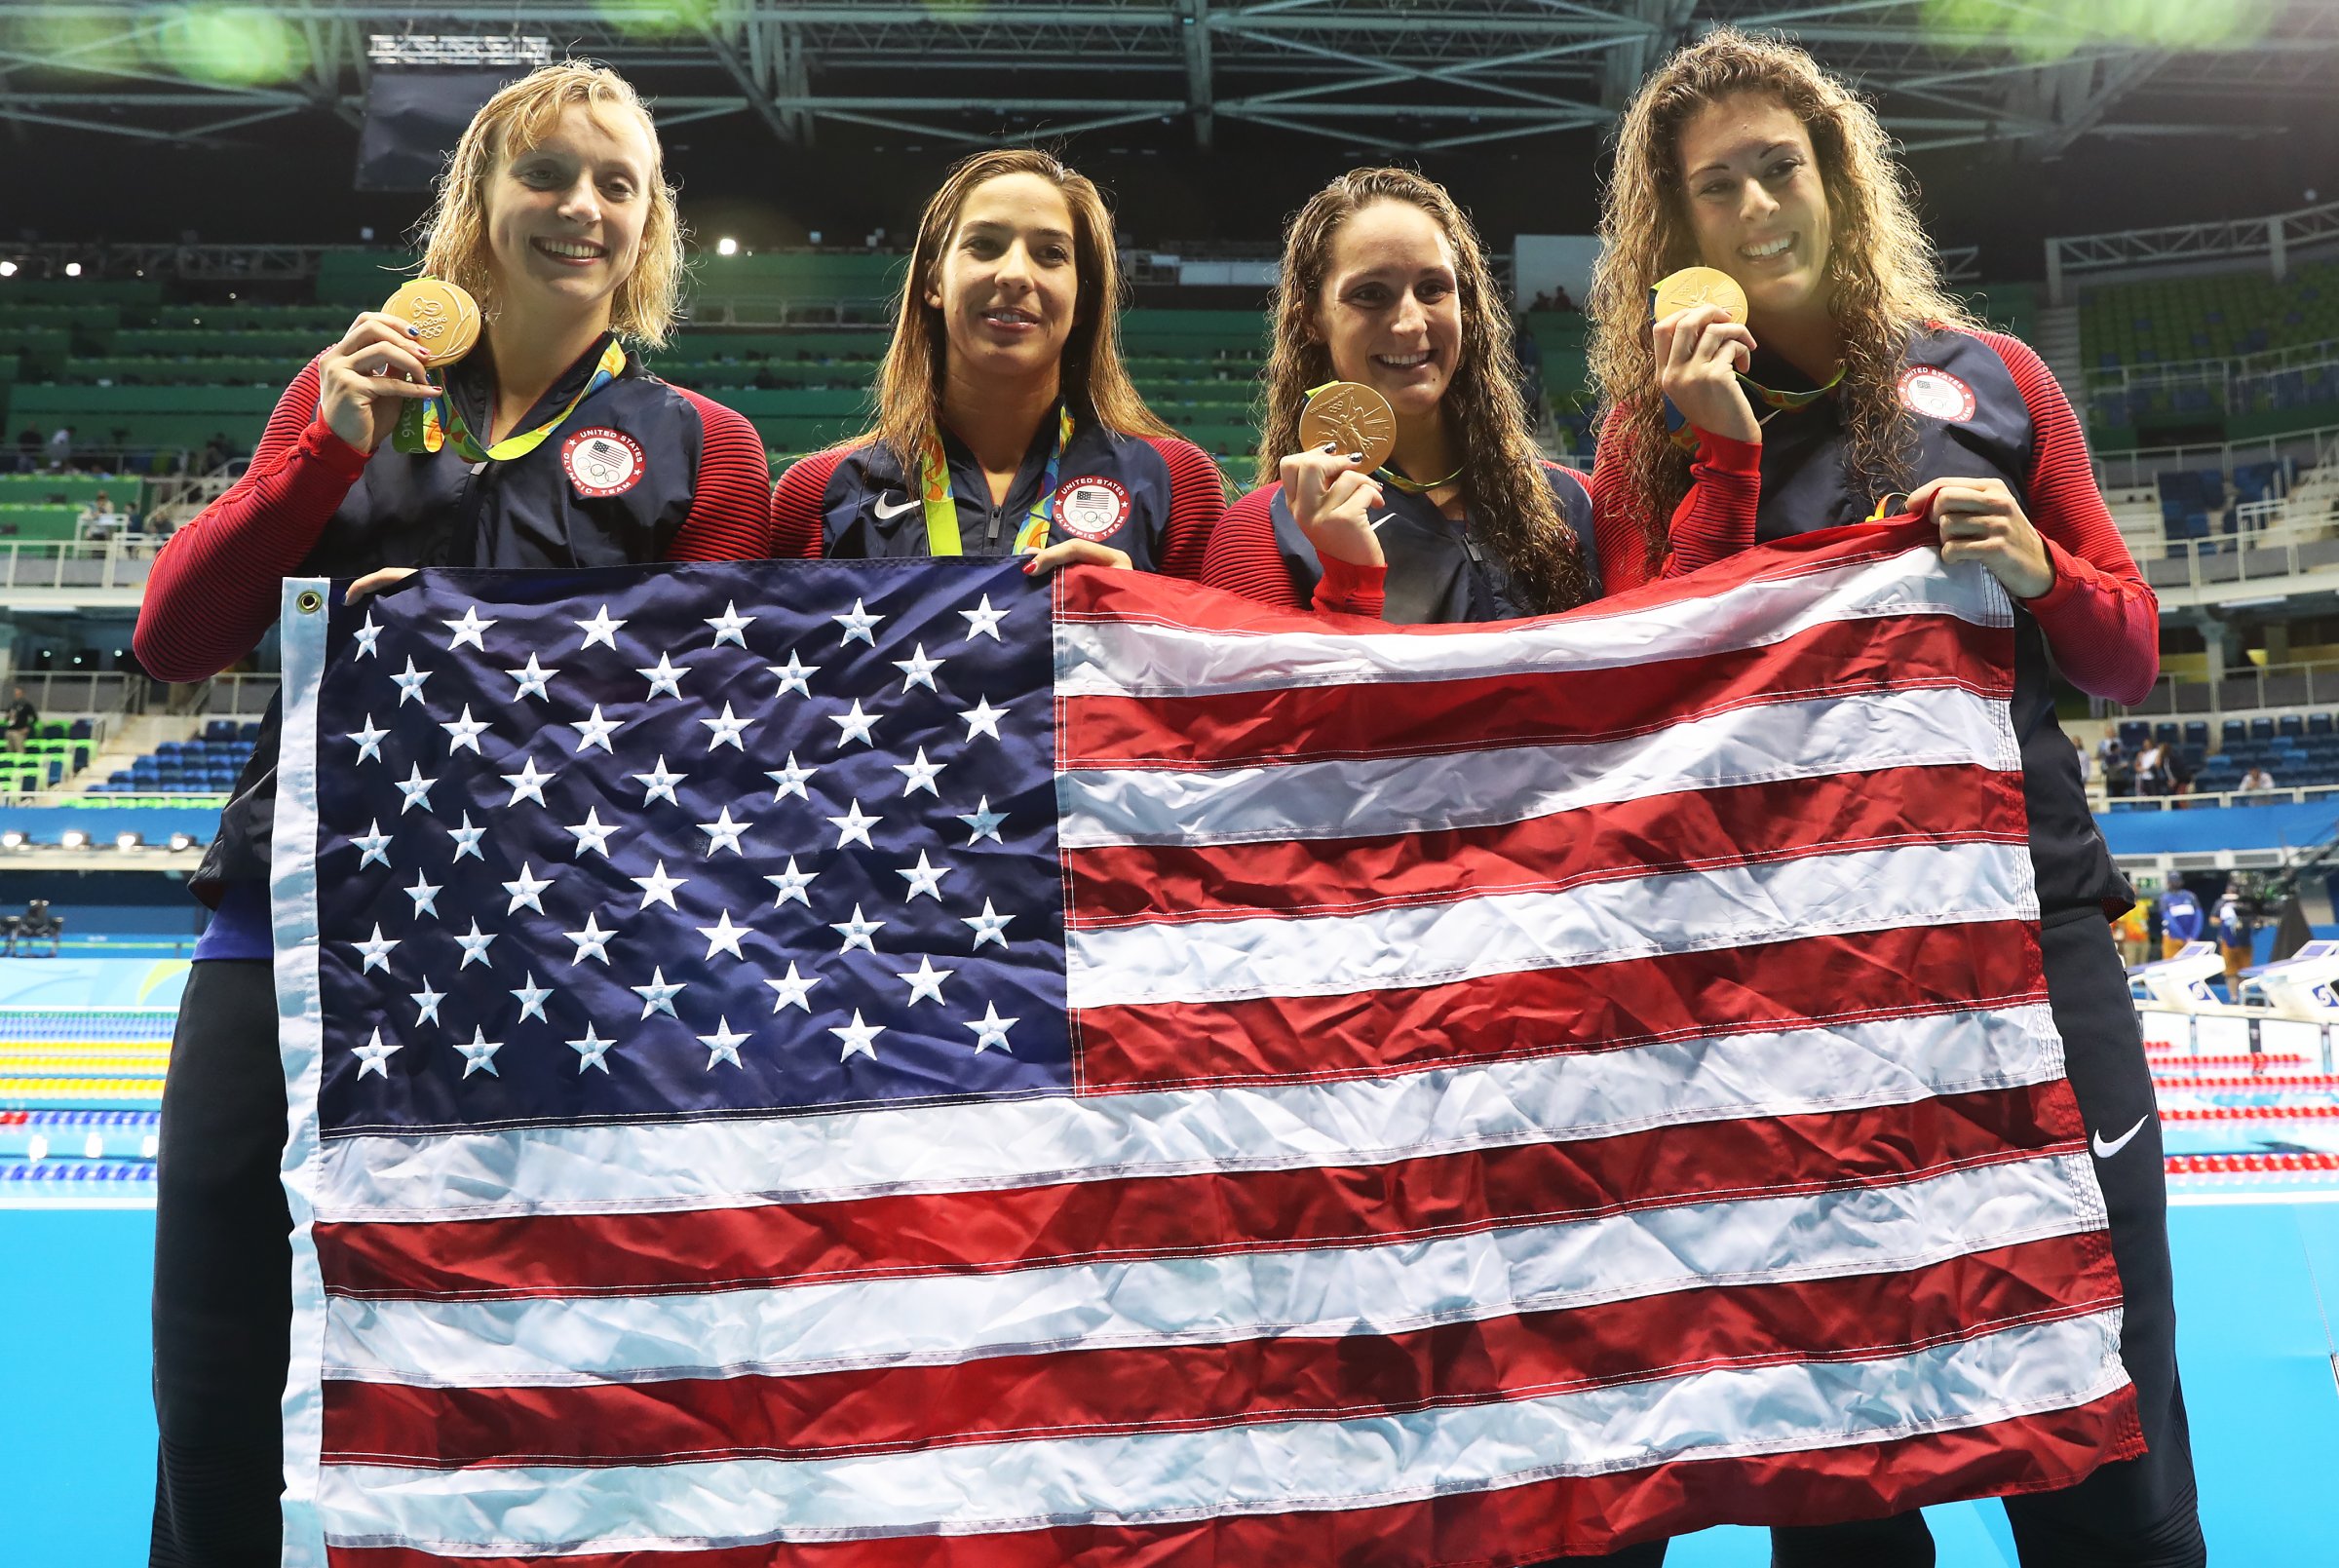 Katie Ledecky, Maya Dirado, Leah Smith and Allison Schimdt of United States pose with their Gold medals from the Women's 4 x 20m Freestyle Relay on Day 5 of the Rio 2016 Olympic Games at the Olympic Aquatics Stadium in Rio de Janeiro on August 10, 2016.